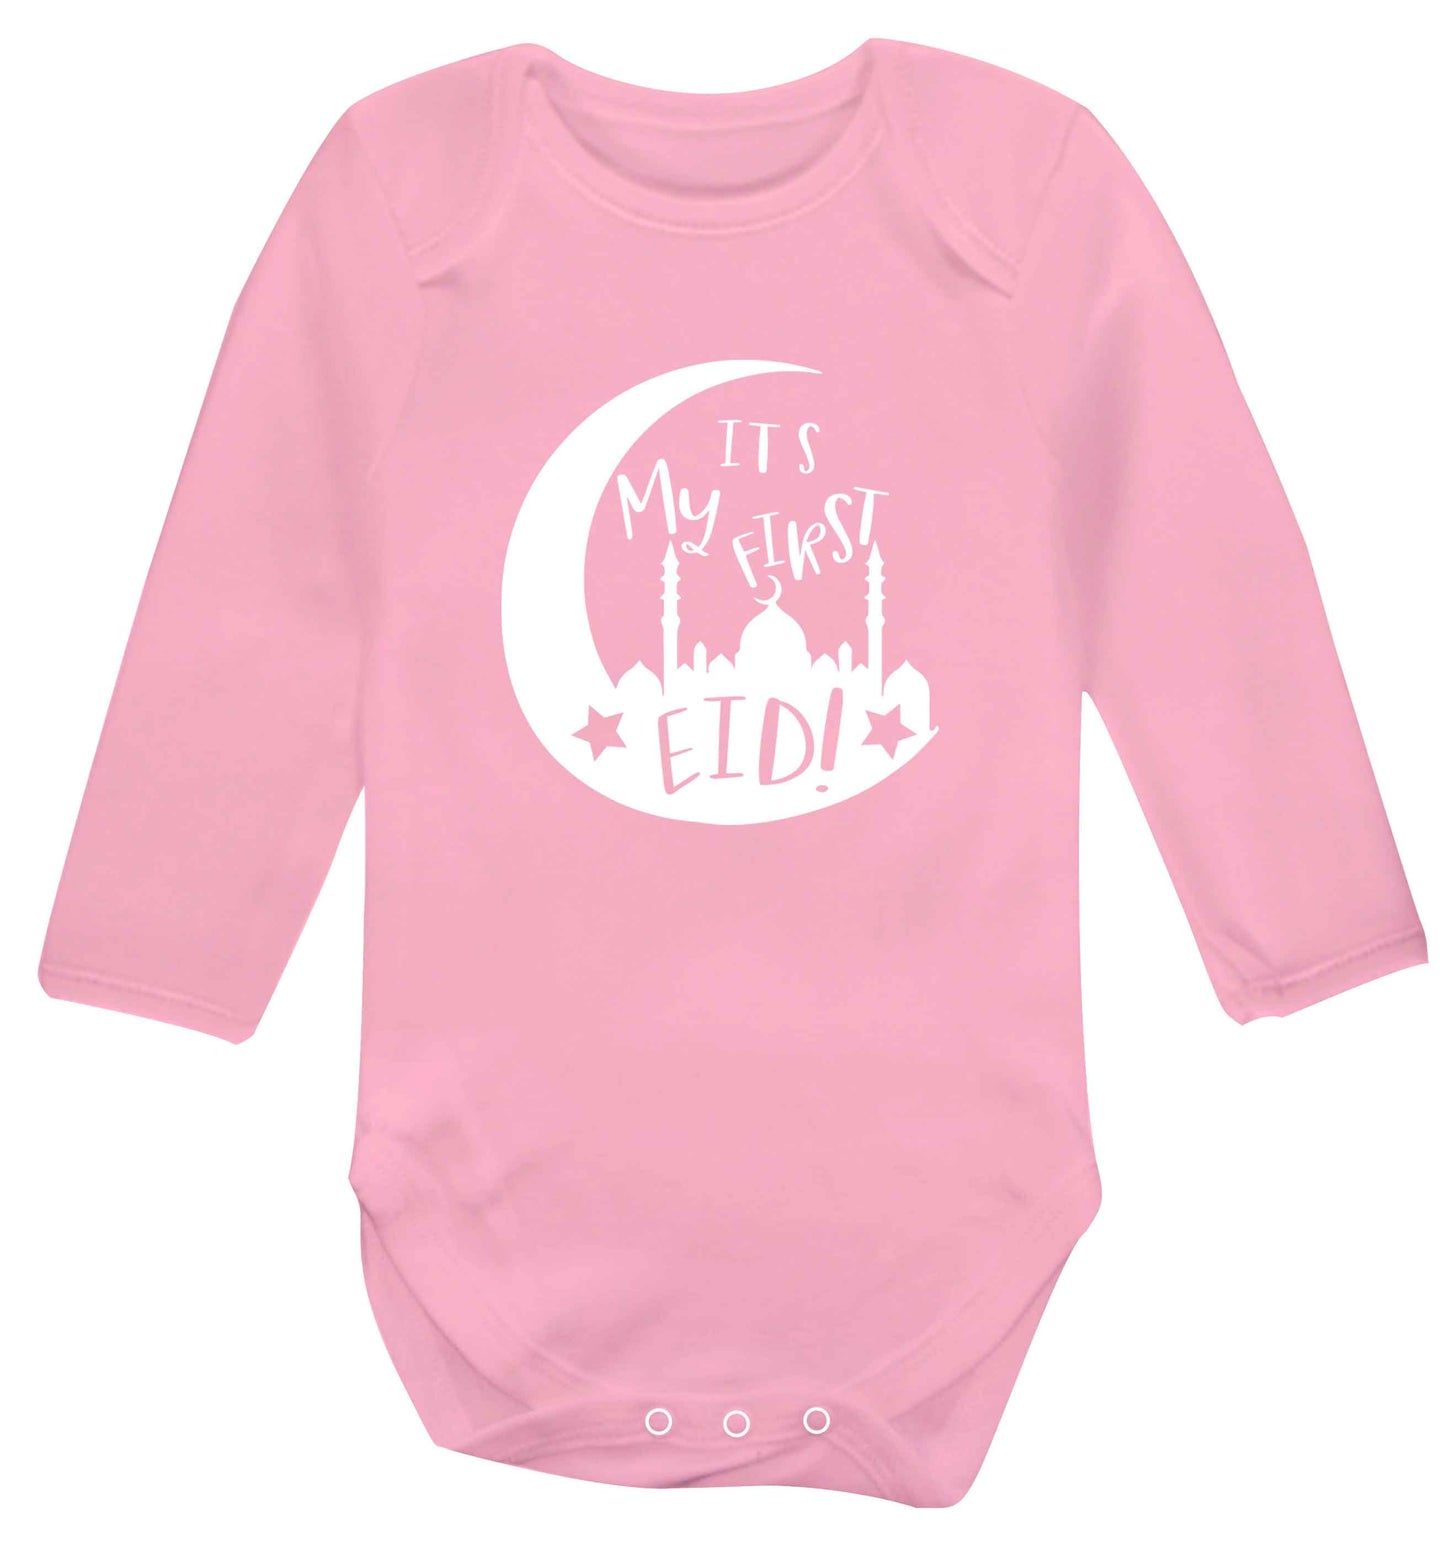 It's my first Eid moon baby vest long sleeved pale pink 6-12 months